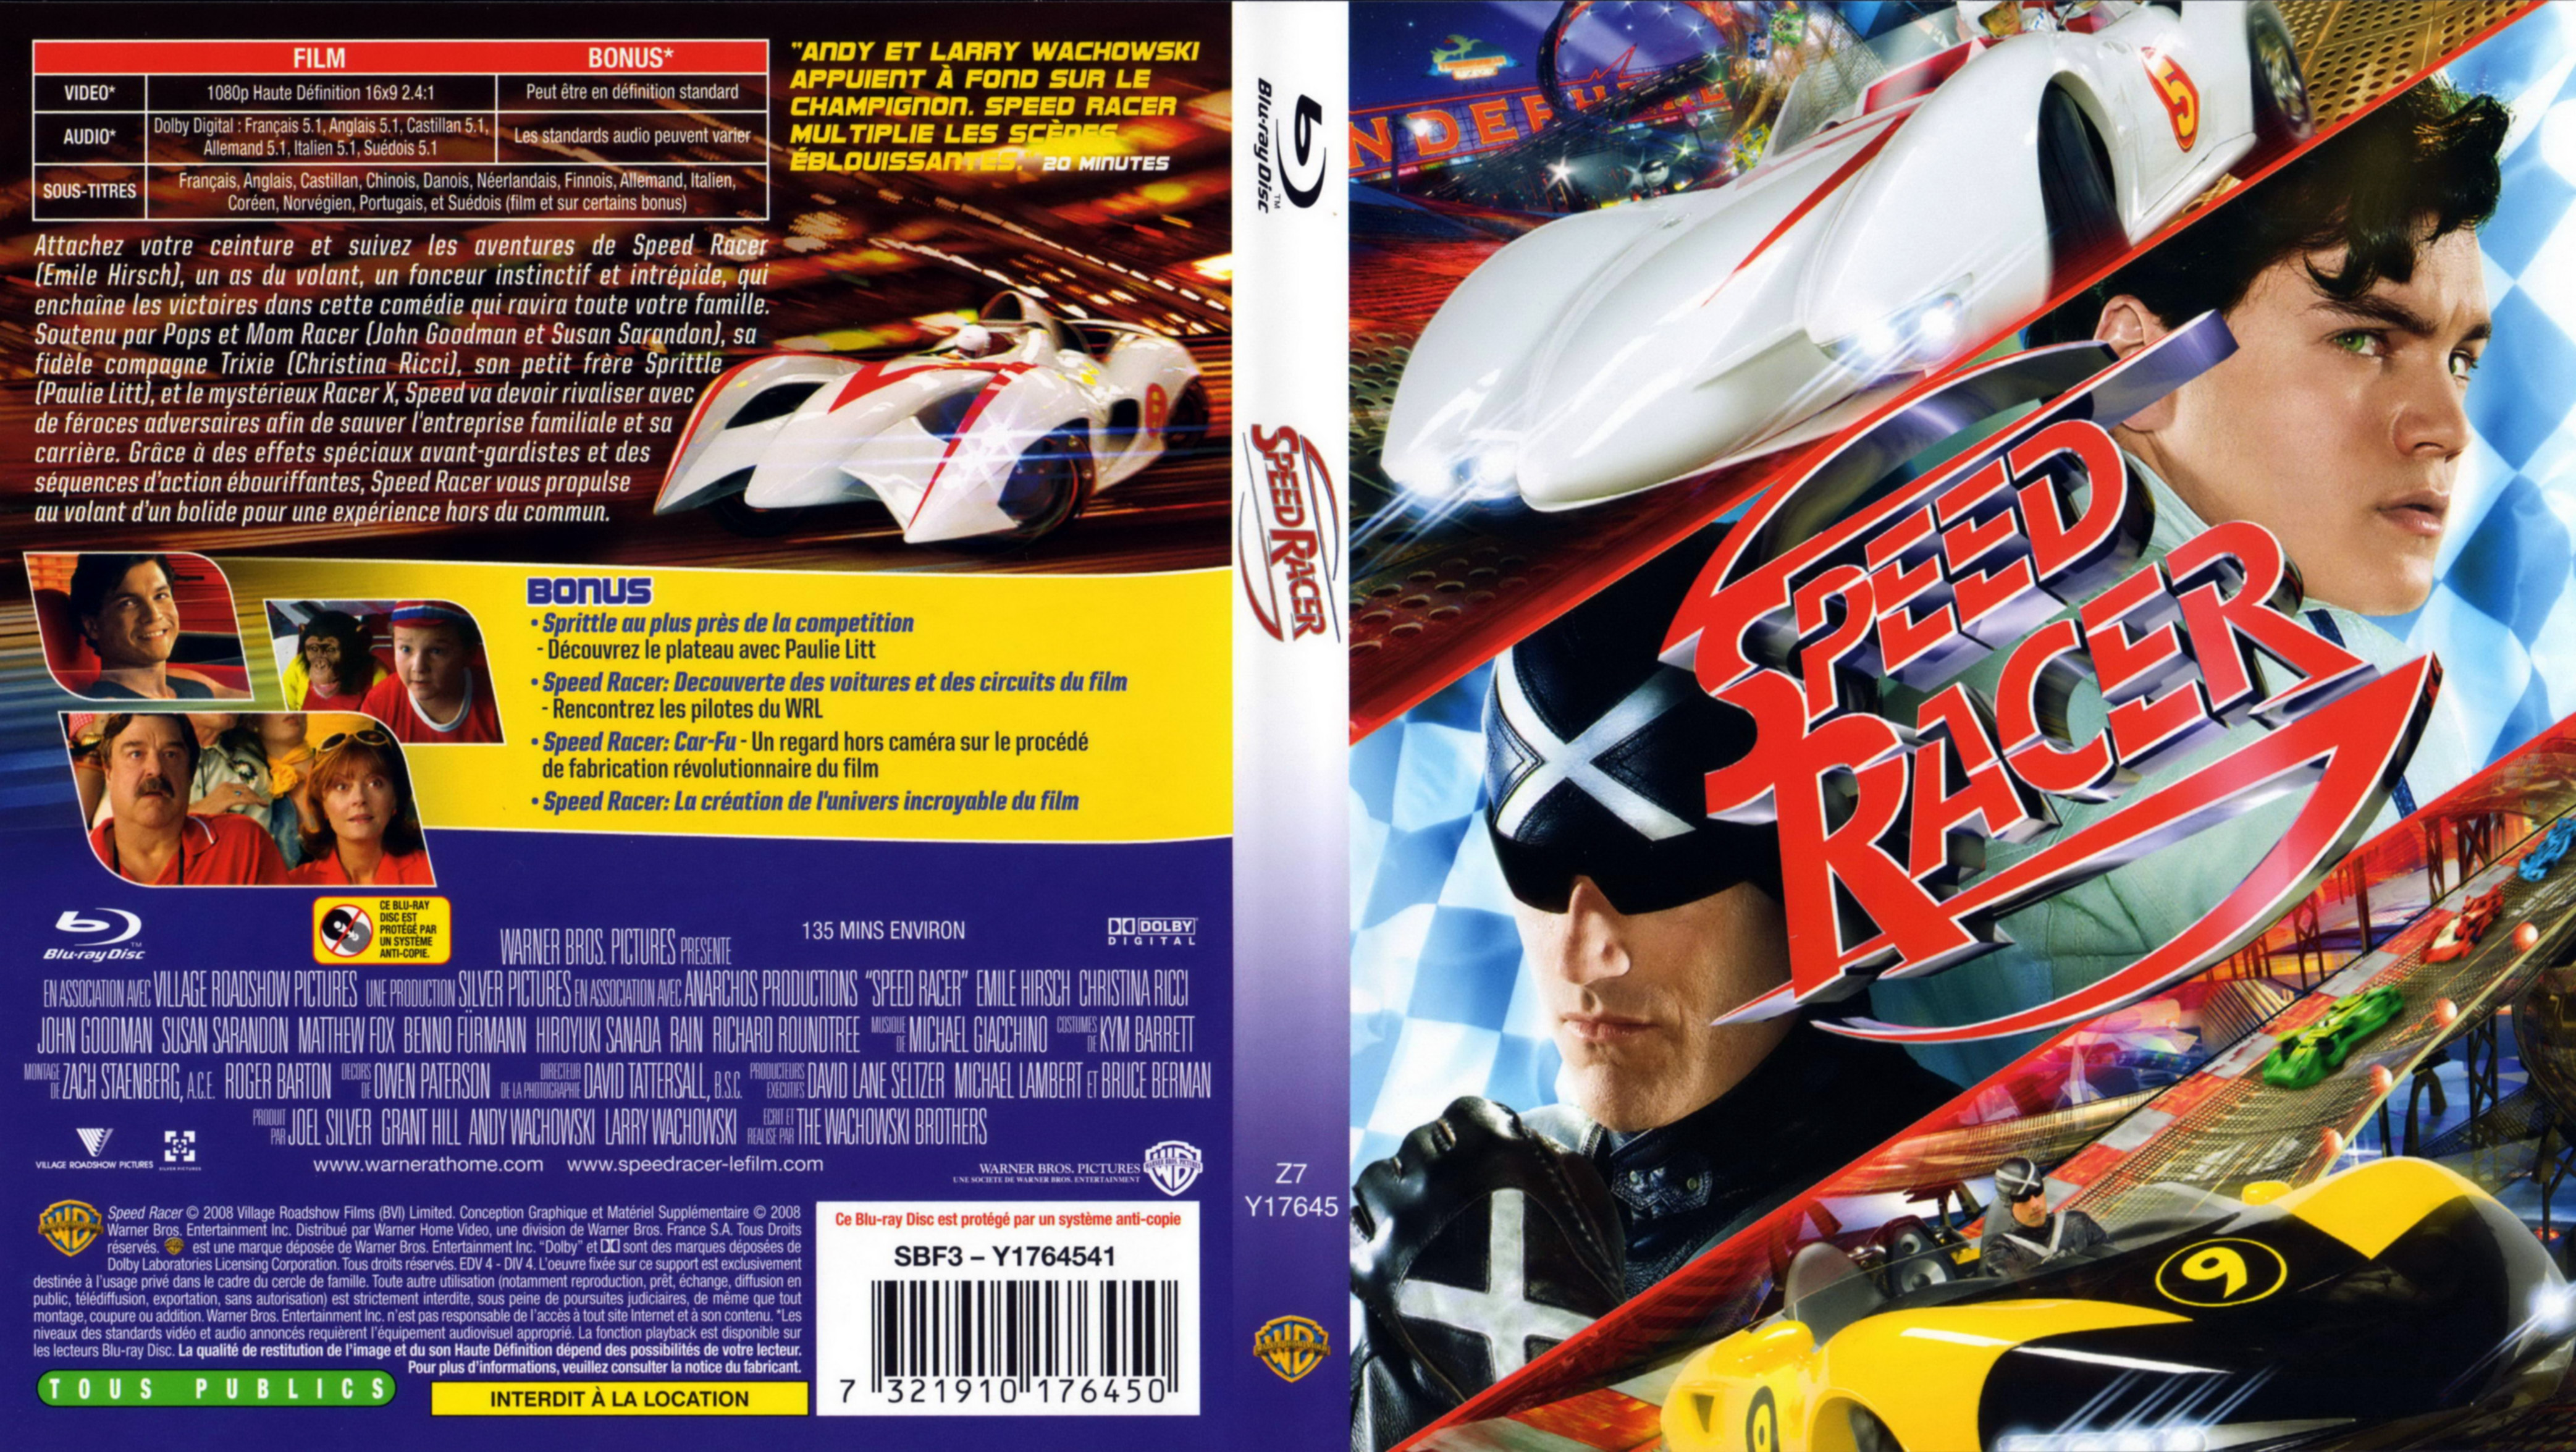 Jaquette DVD Speed racer (BLU-RAY)